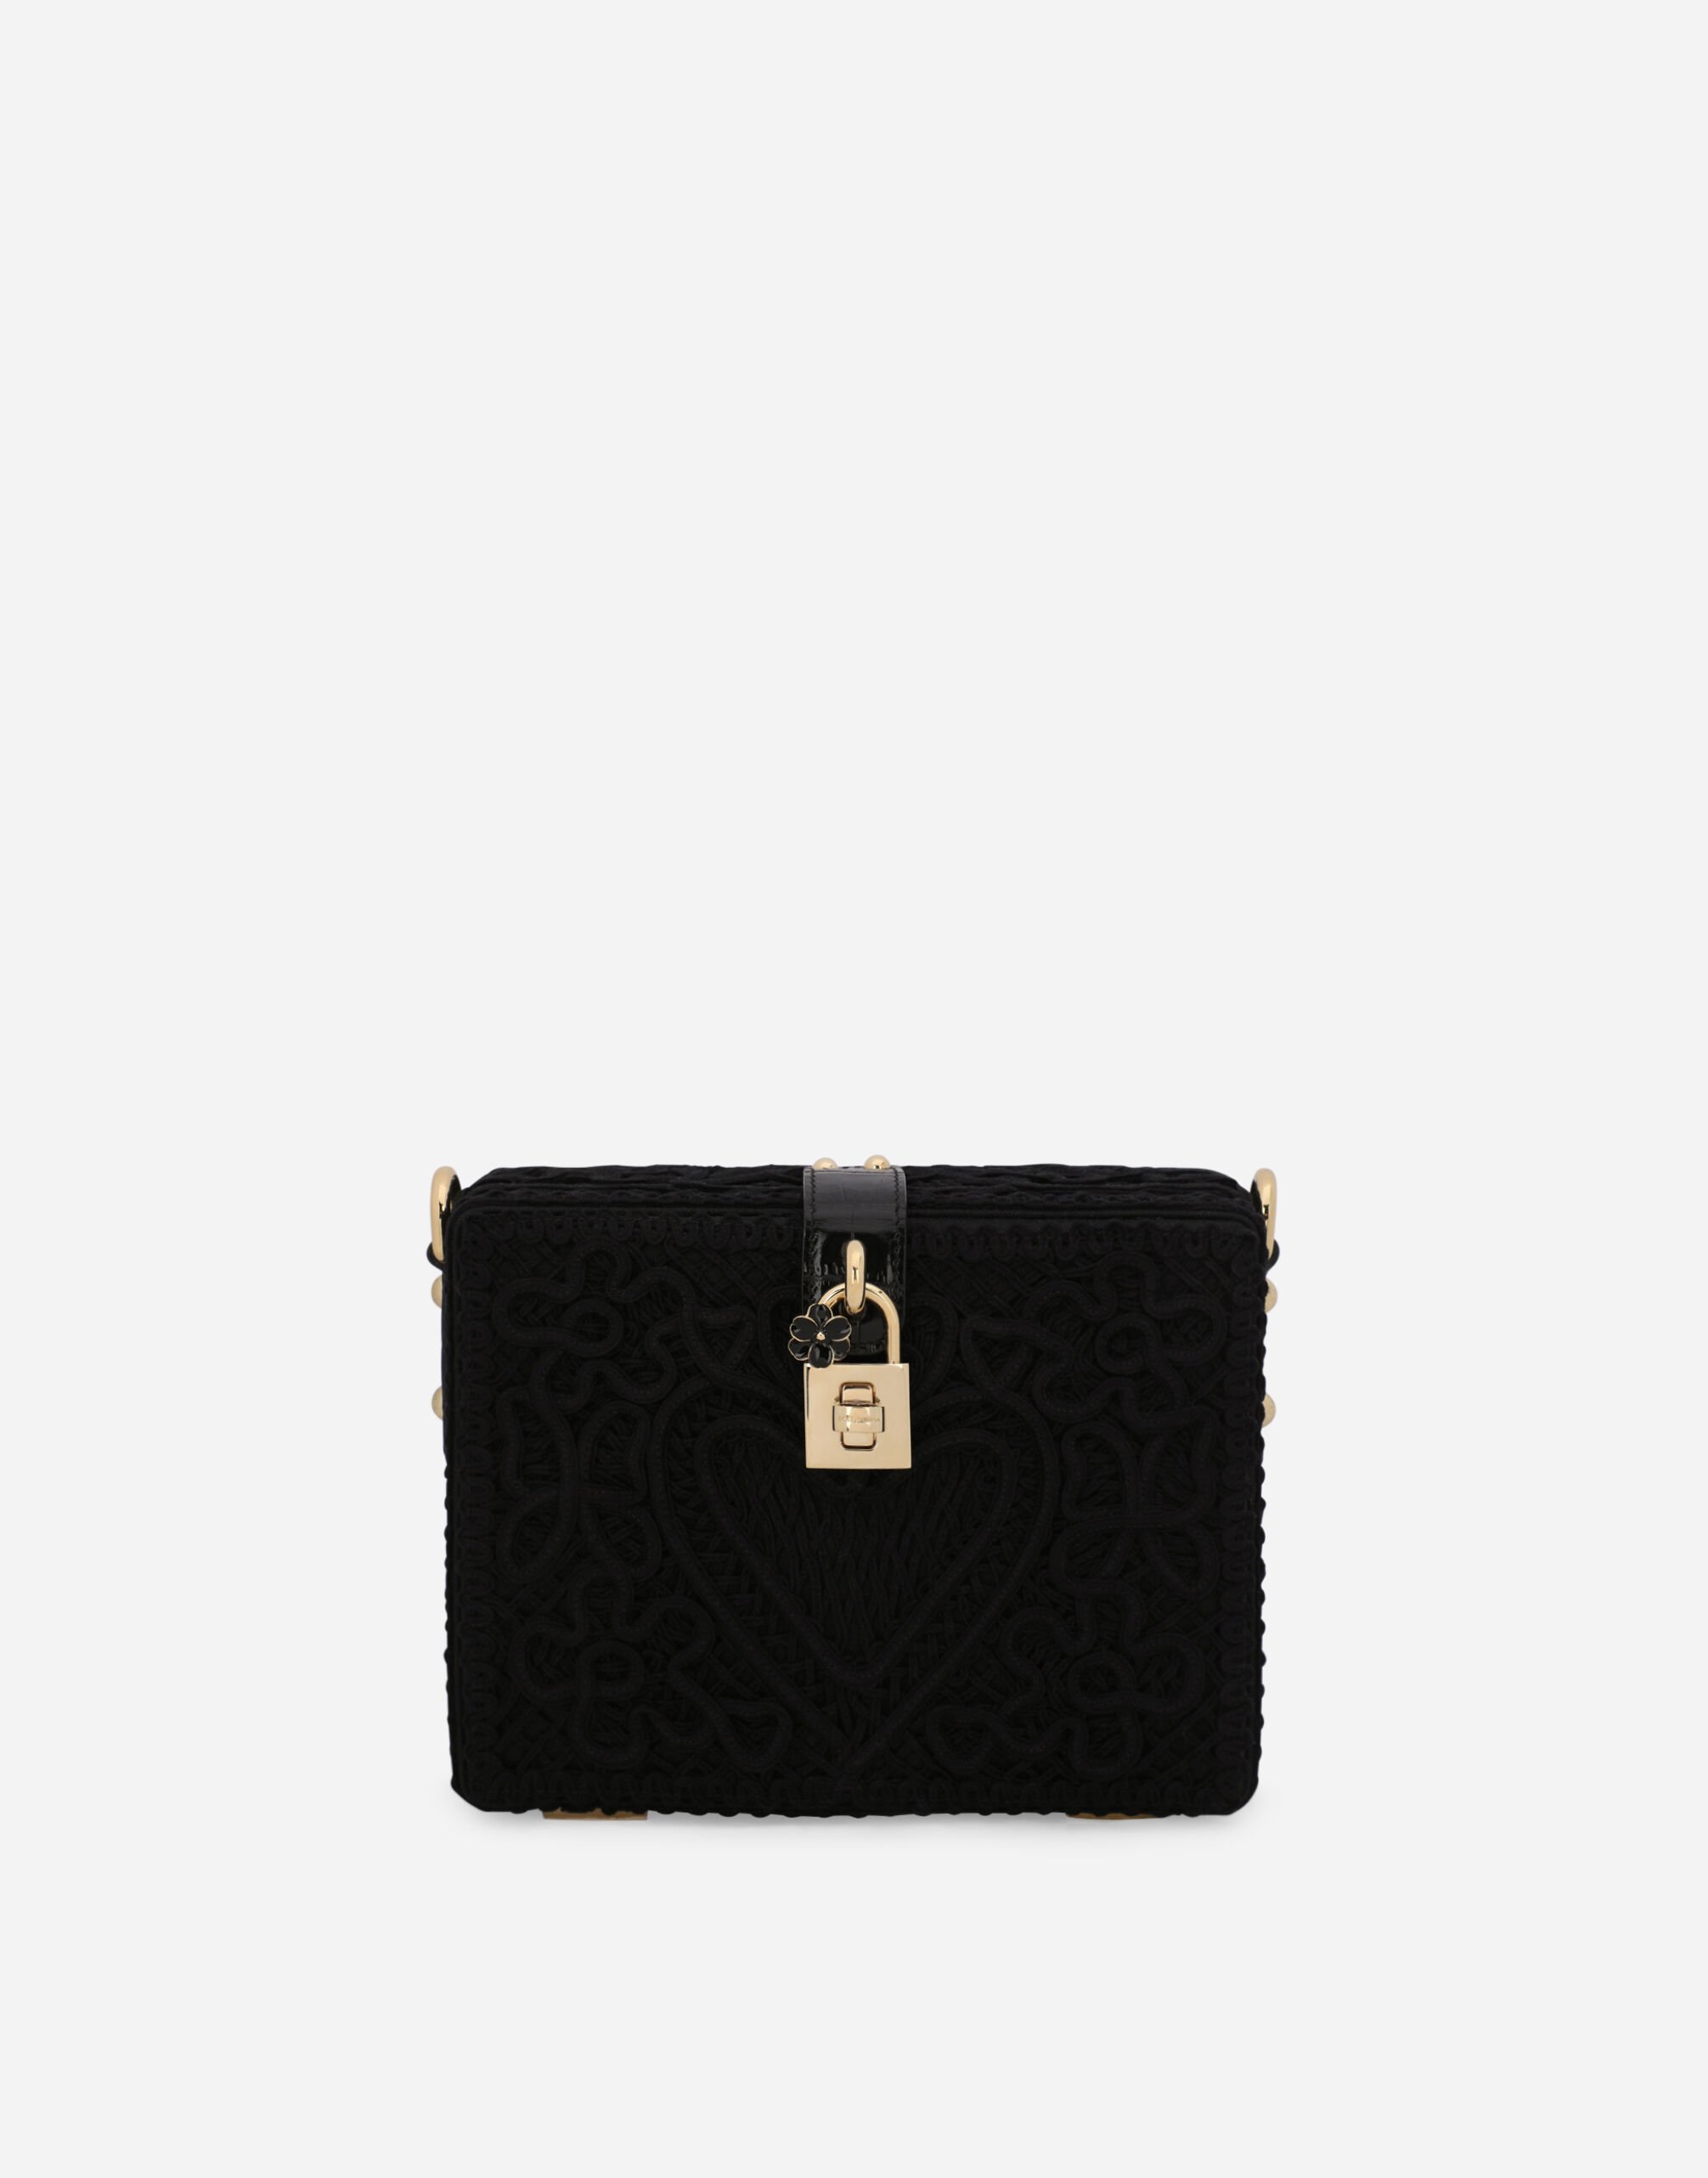 Dolce&Gabbana Dolce Box bag with cordonetto detailing Gold BB7567AY828